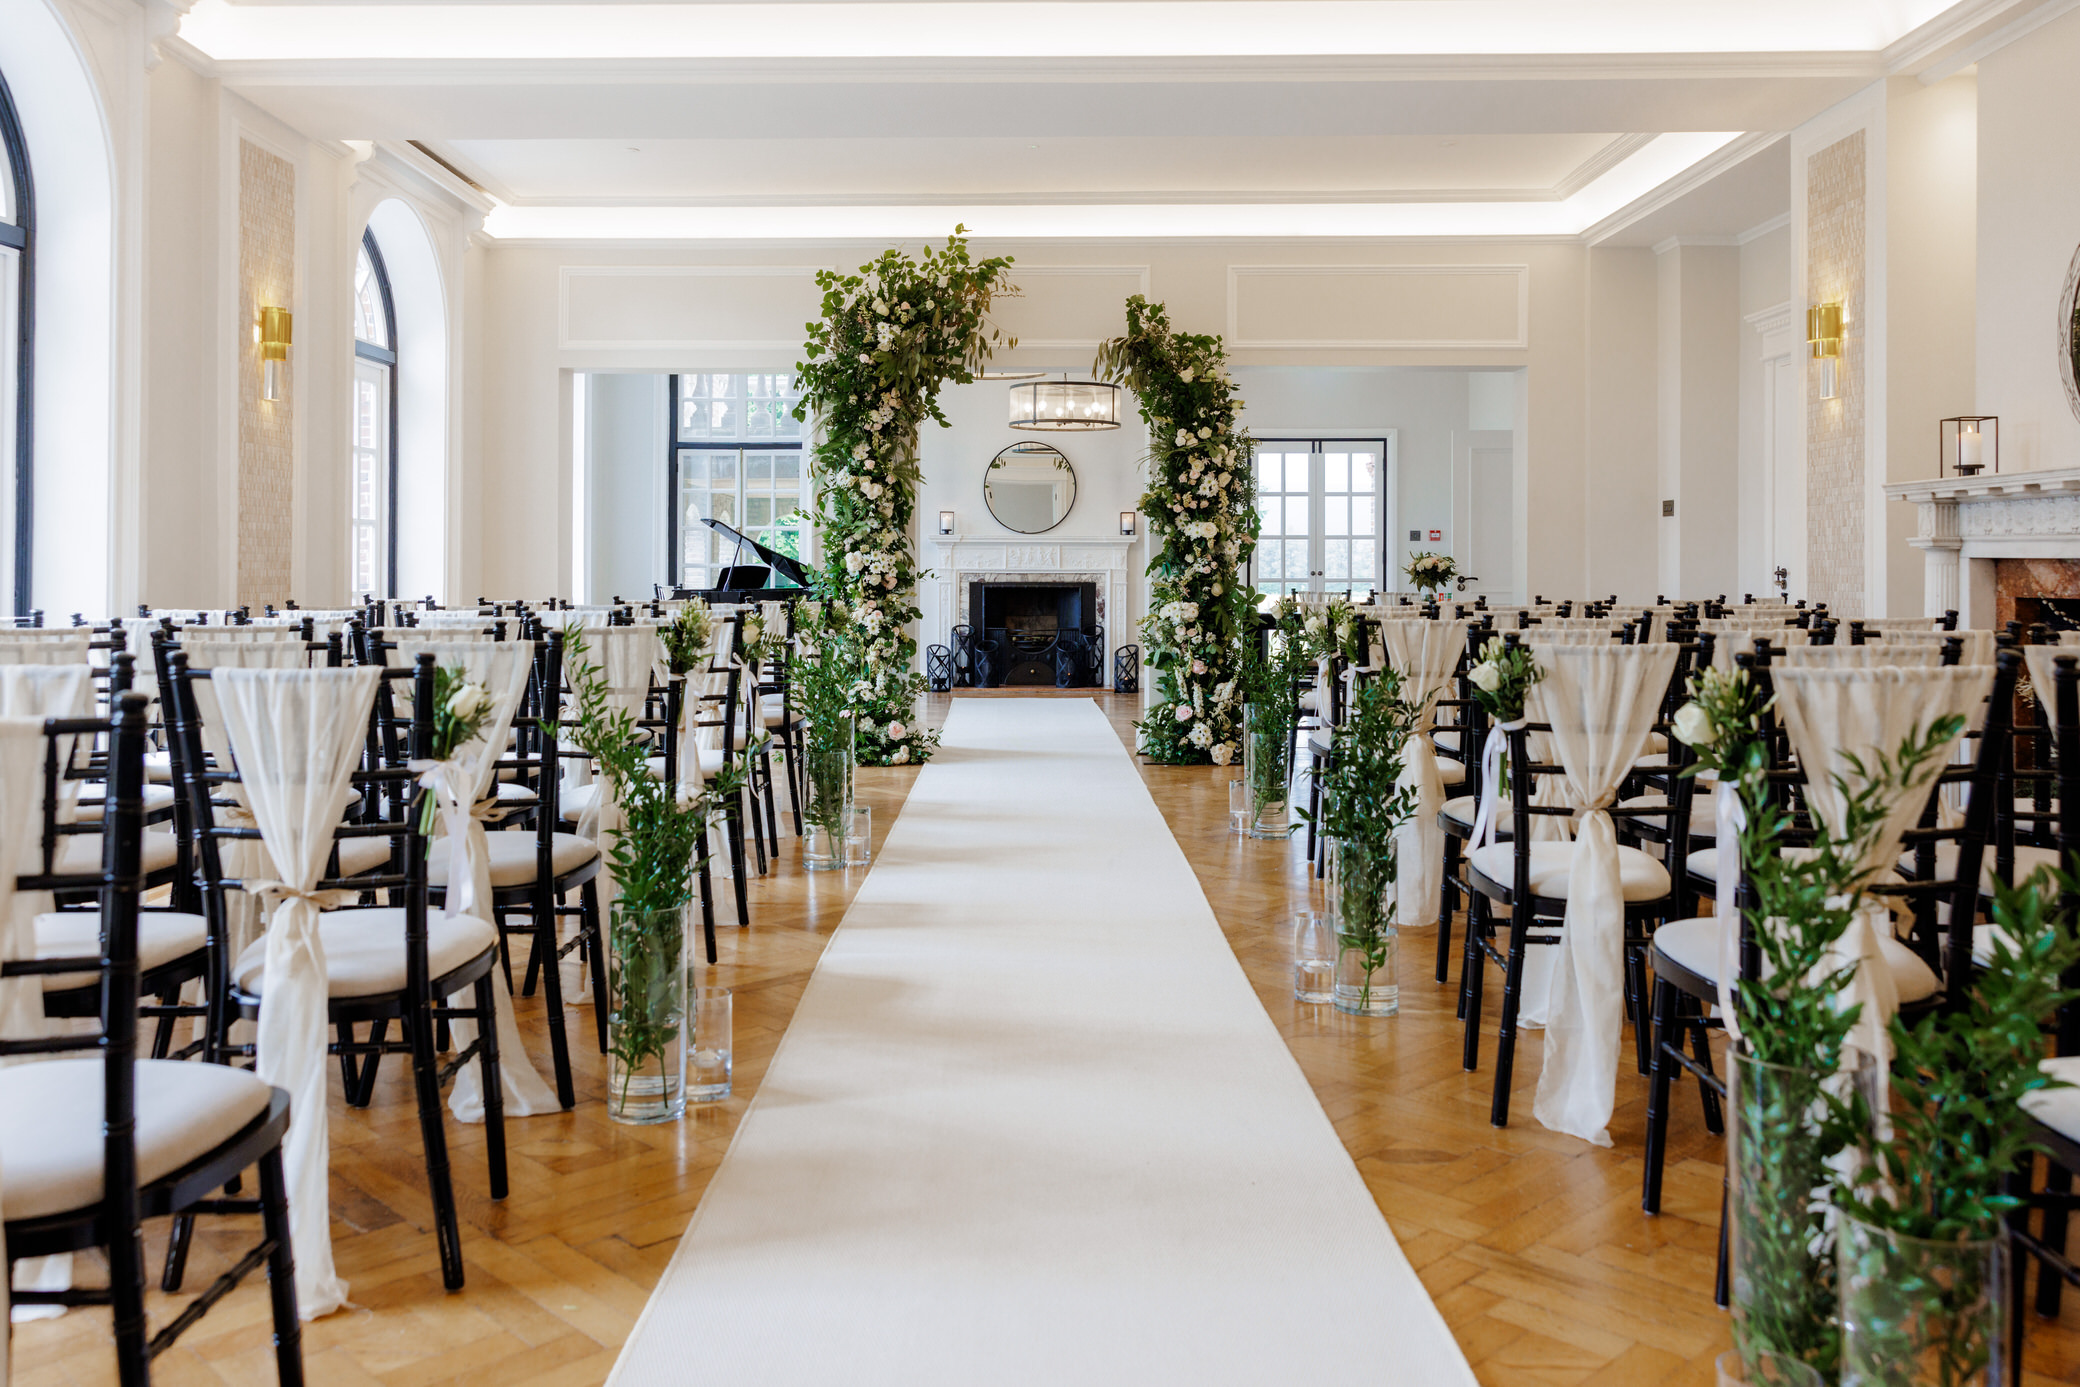 Sant Ffread House Drawing room - The ceremony room